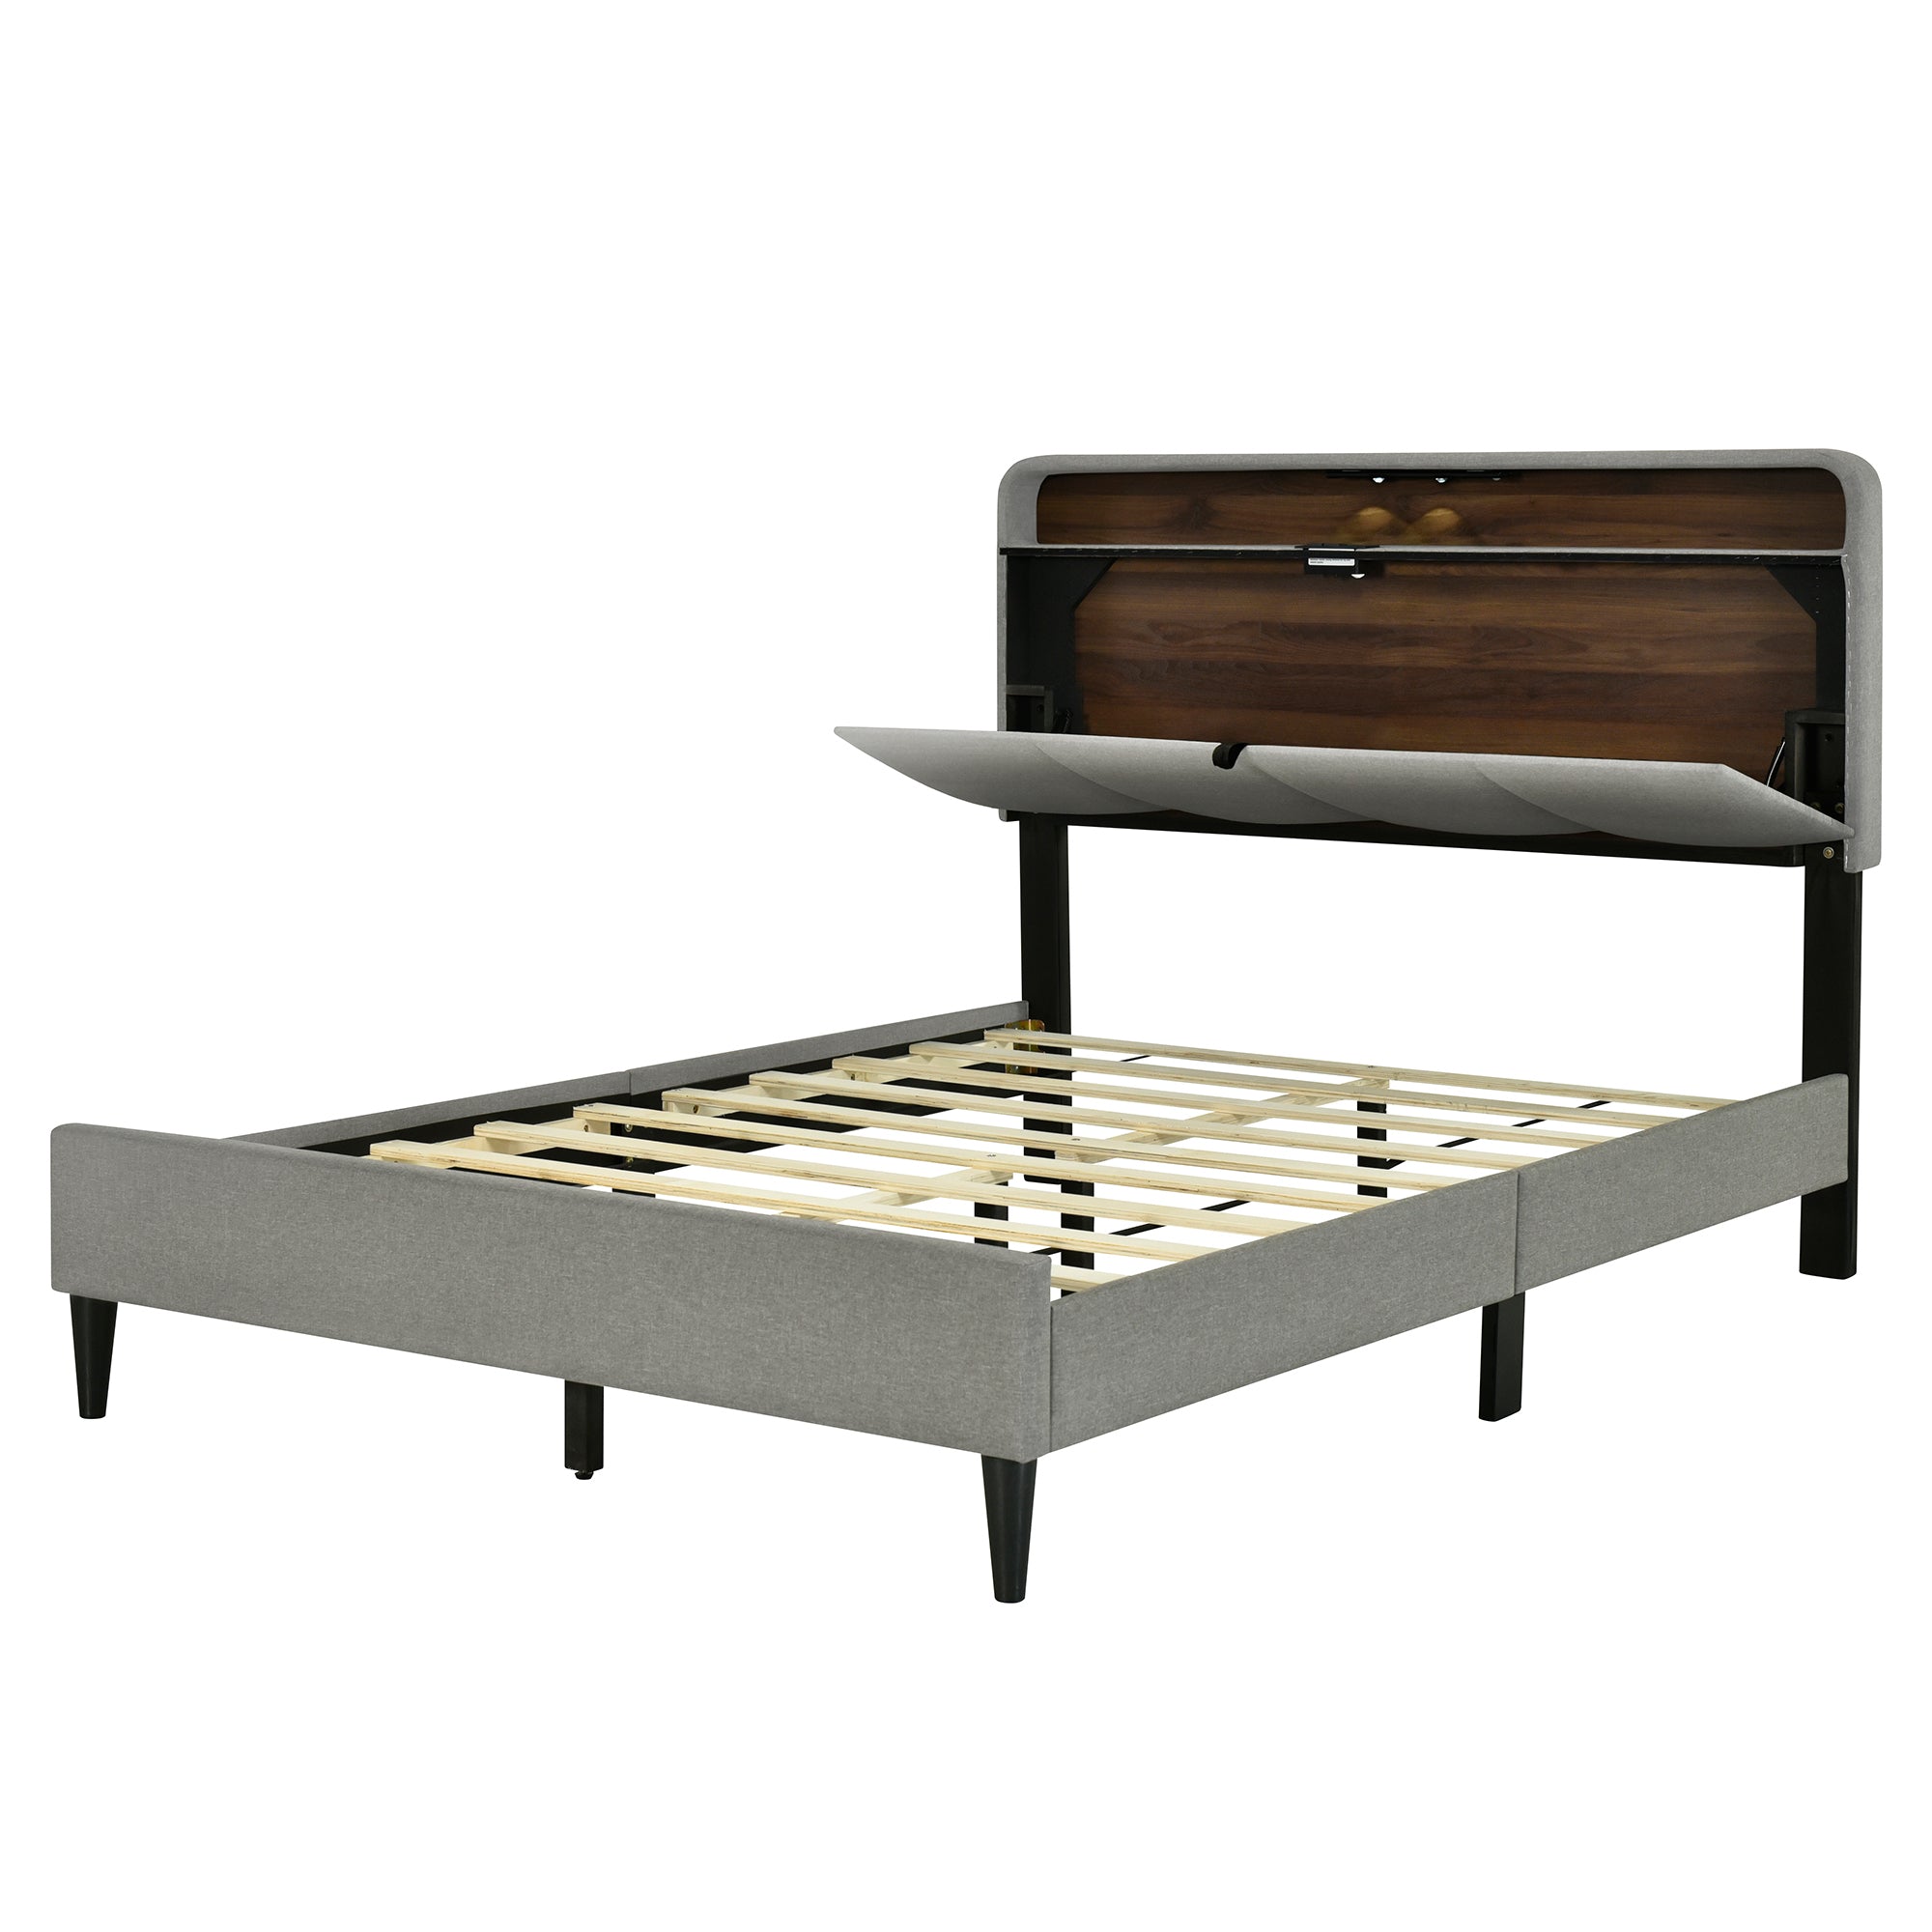 Full size Upholstered Platform Bed with Storage gray-linen